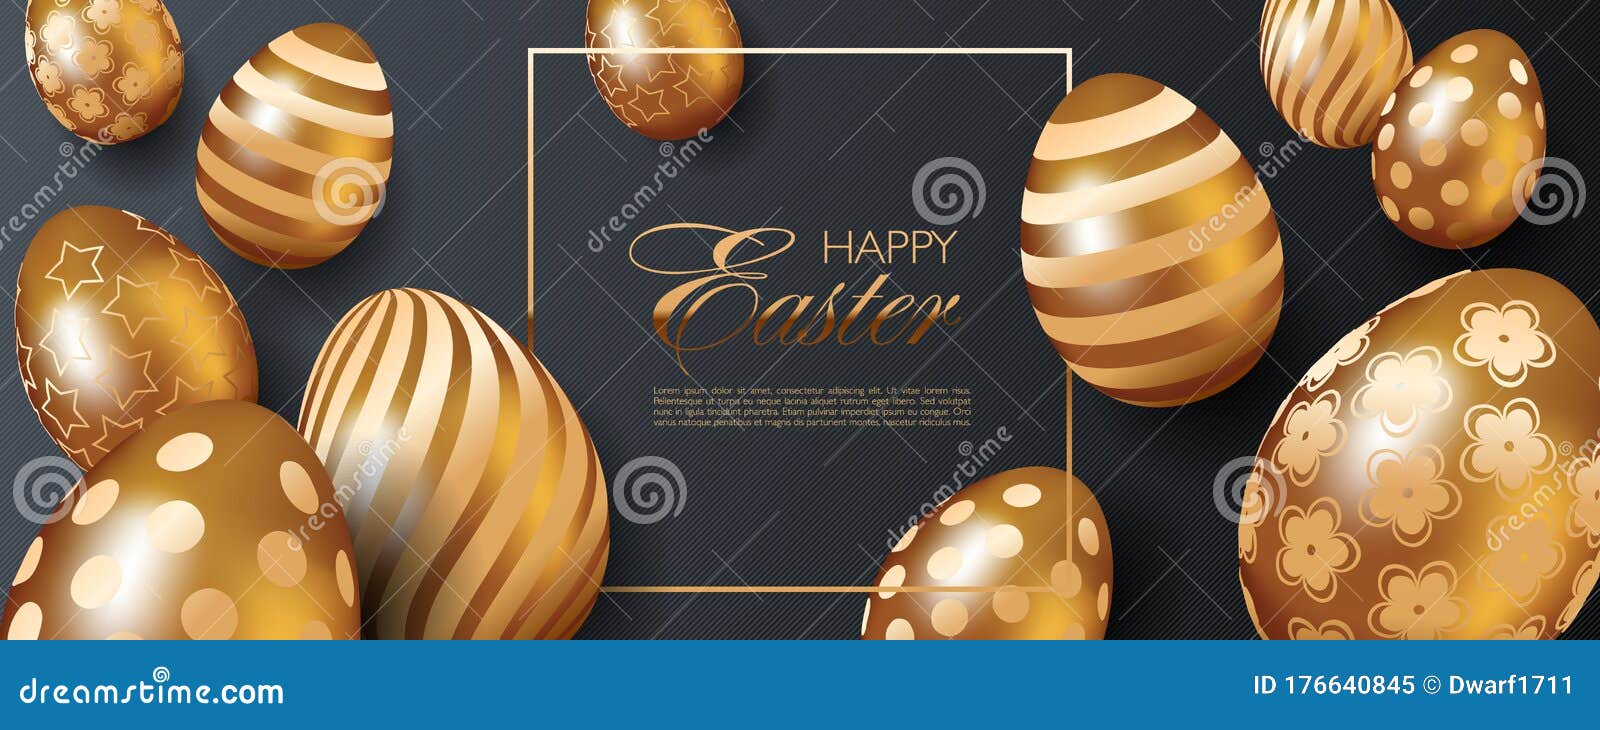 Luxury Happy Easter website header or banner template with realistic 3D golden eggs on black striped background 